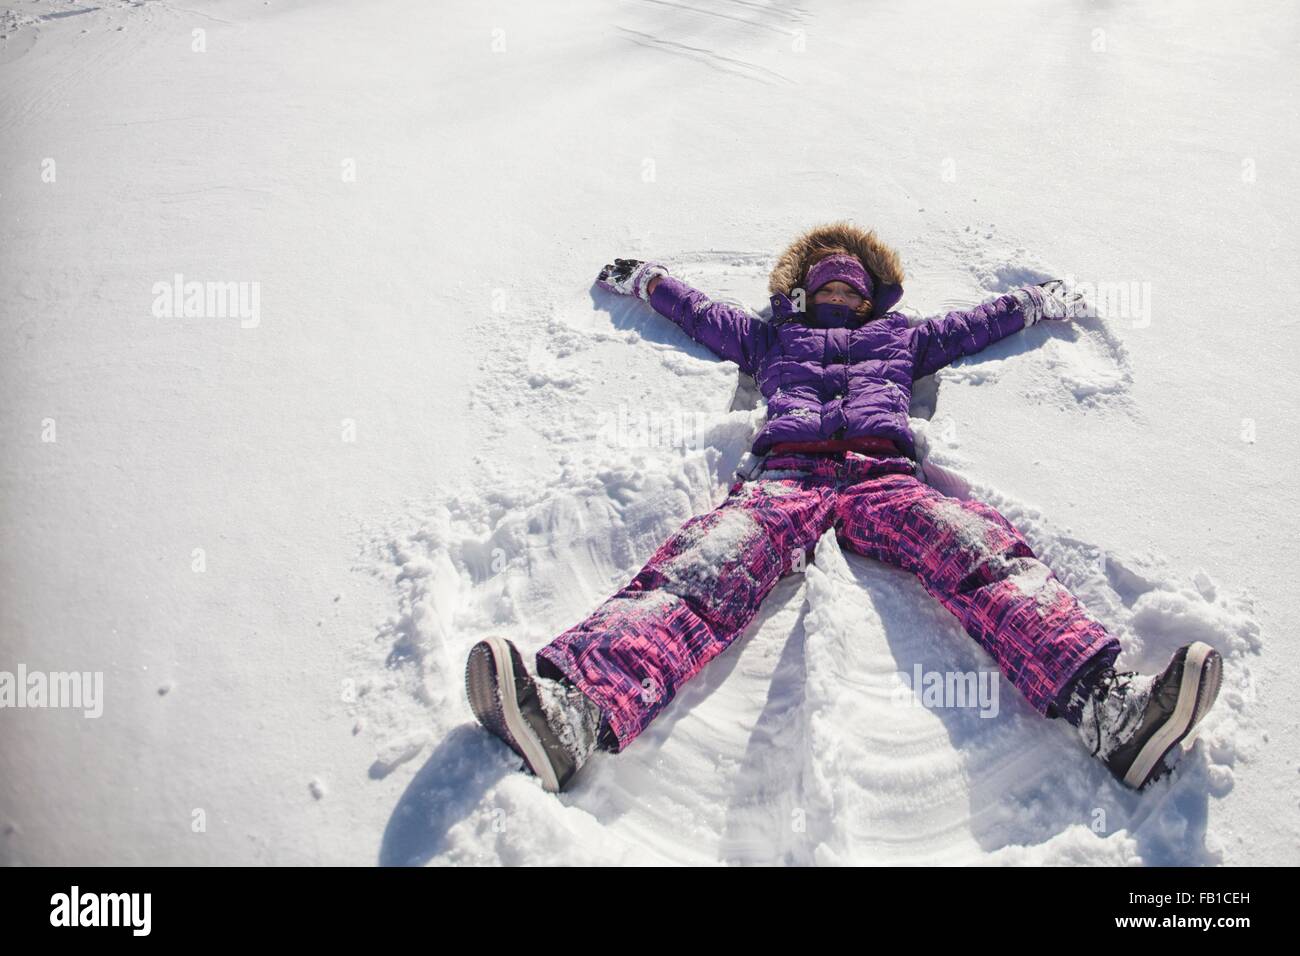 High angle view of girl wearing ski suit lying snow making snow angel Stock Photo